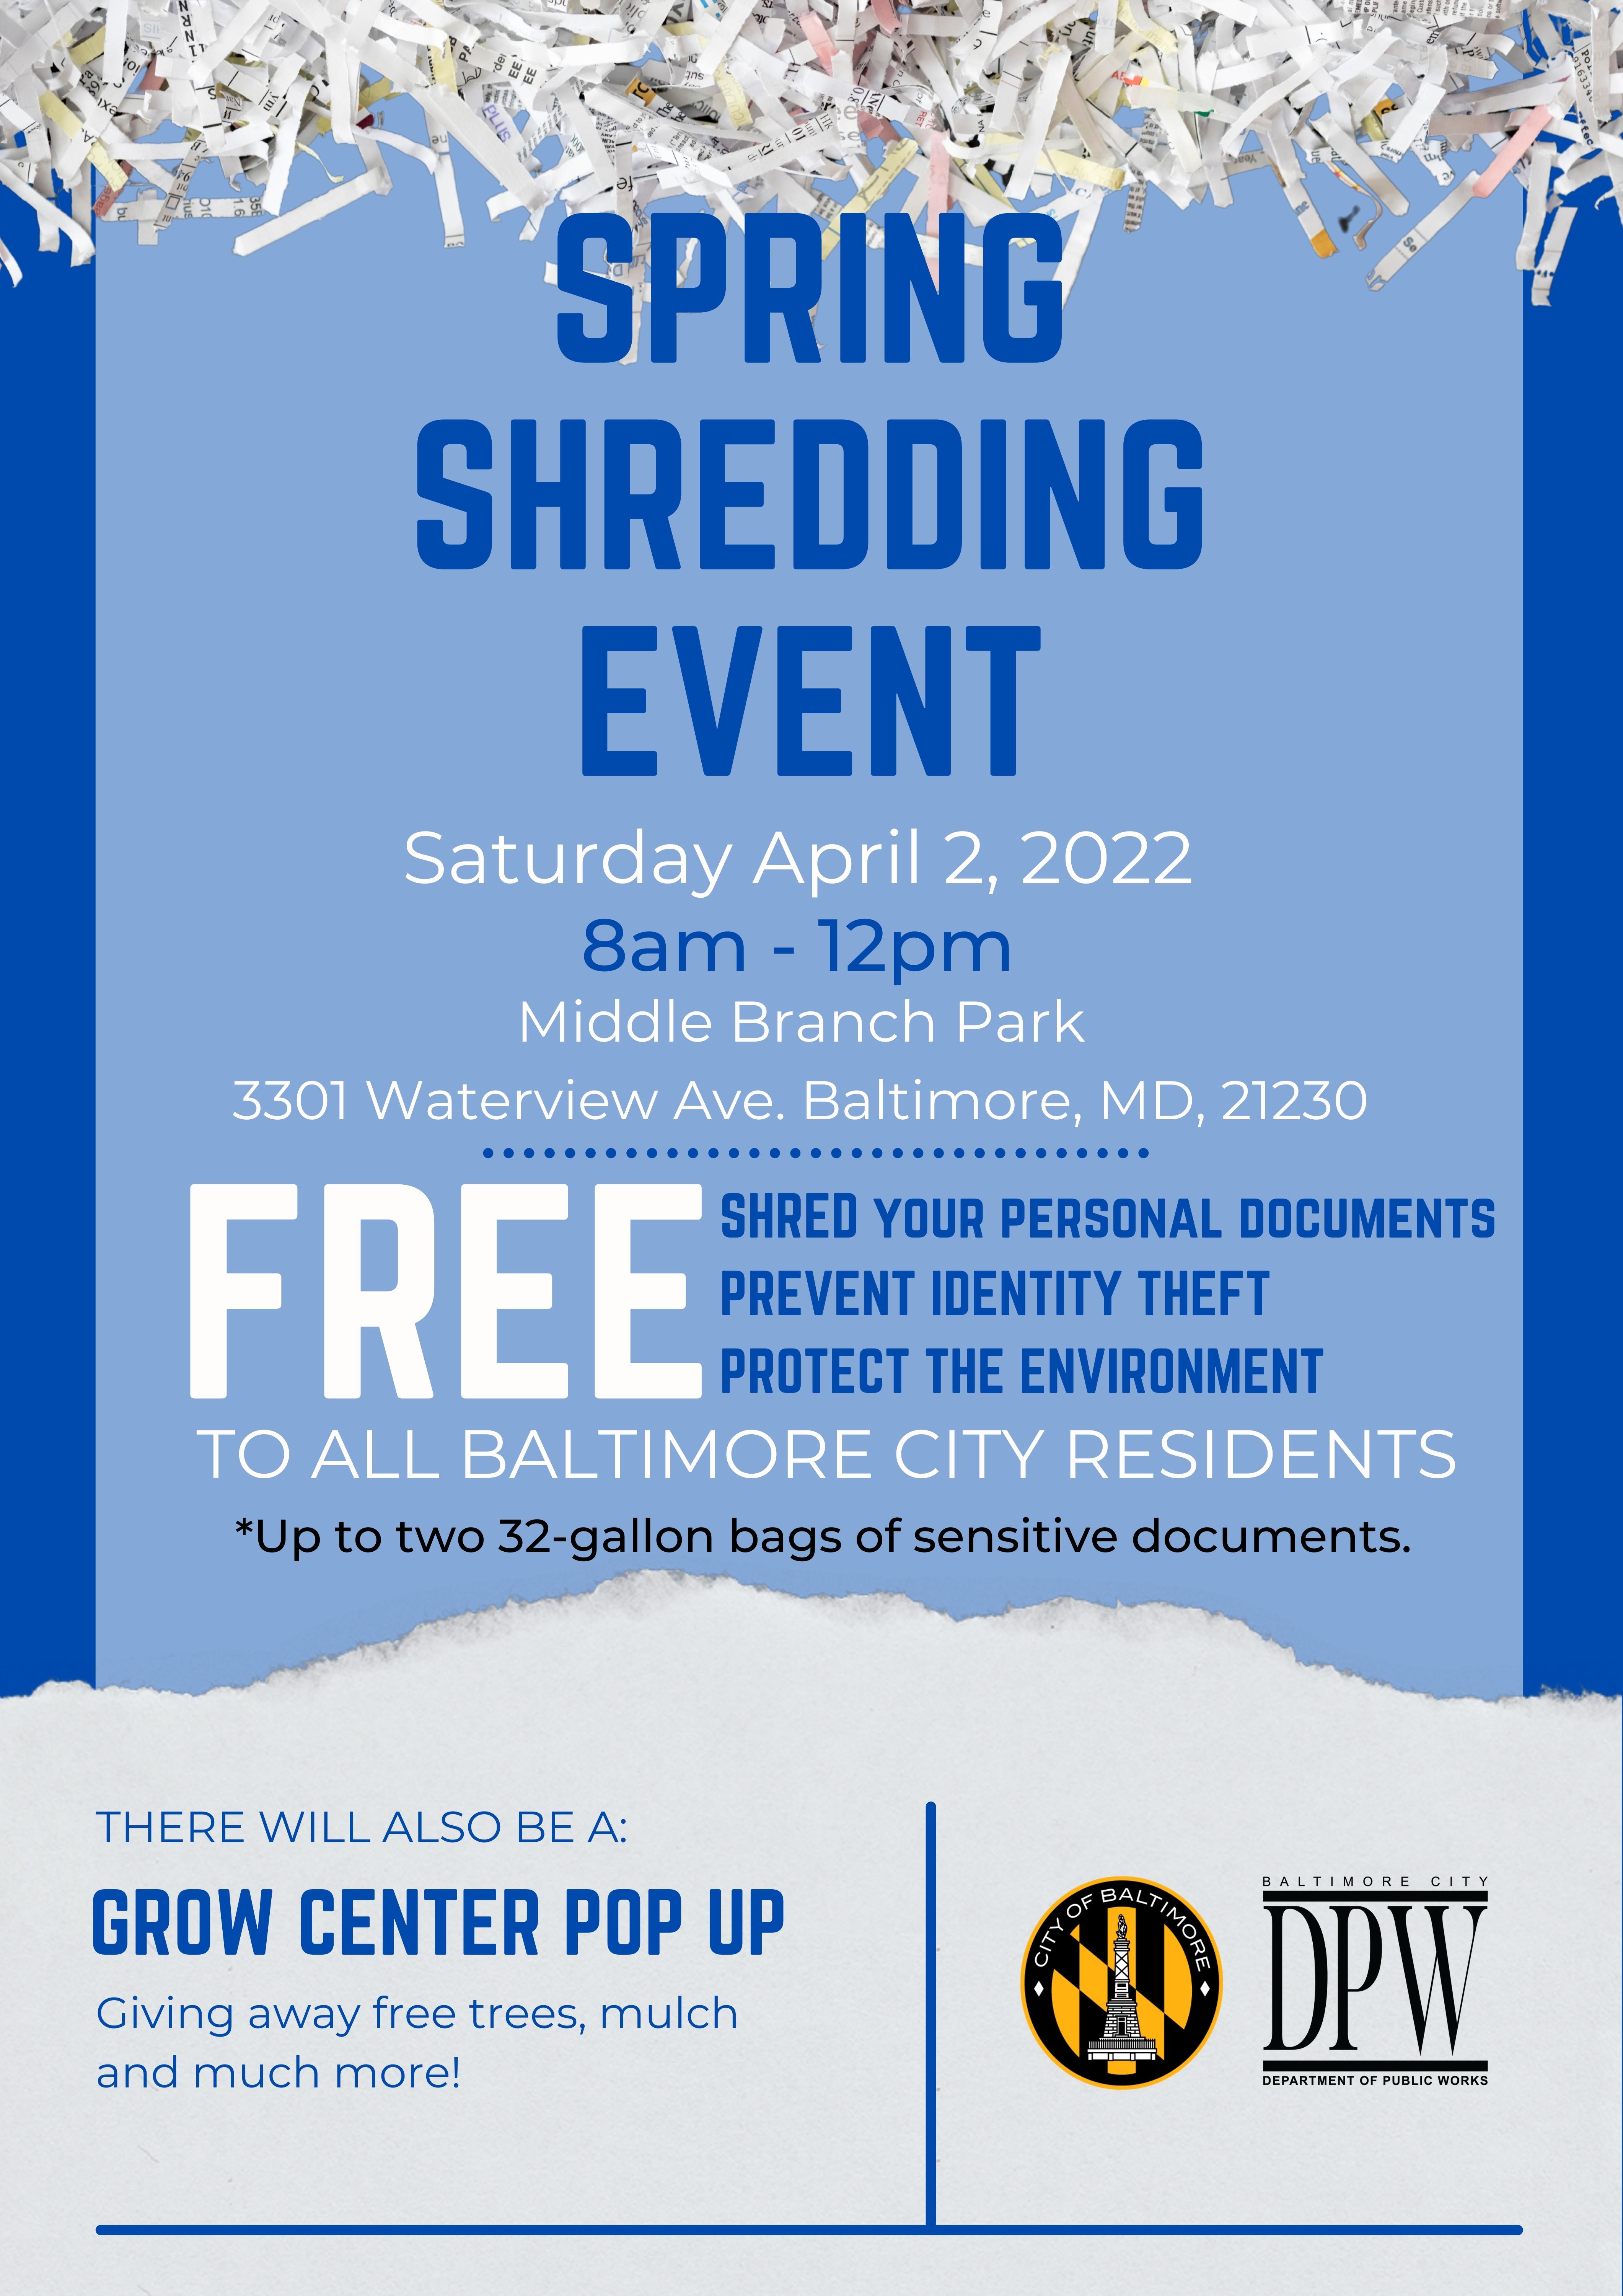 Saturday, April 2,2022 8am - 12pm Middle Branch Park 3301 Waterview Ave. Baltimore, MD, 21230 FREE to all Baltimore City Residents *Shred up to two 32-gallon bags of sensitive documents. GROW Center Pop Up Giving away free trees, mulch, and much more! 